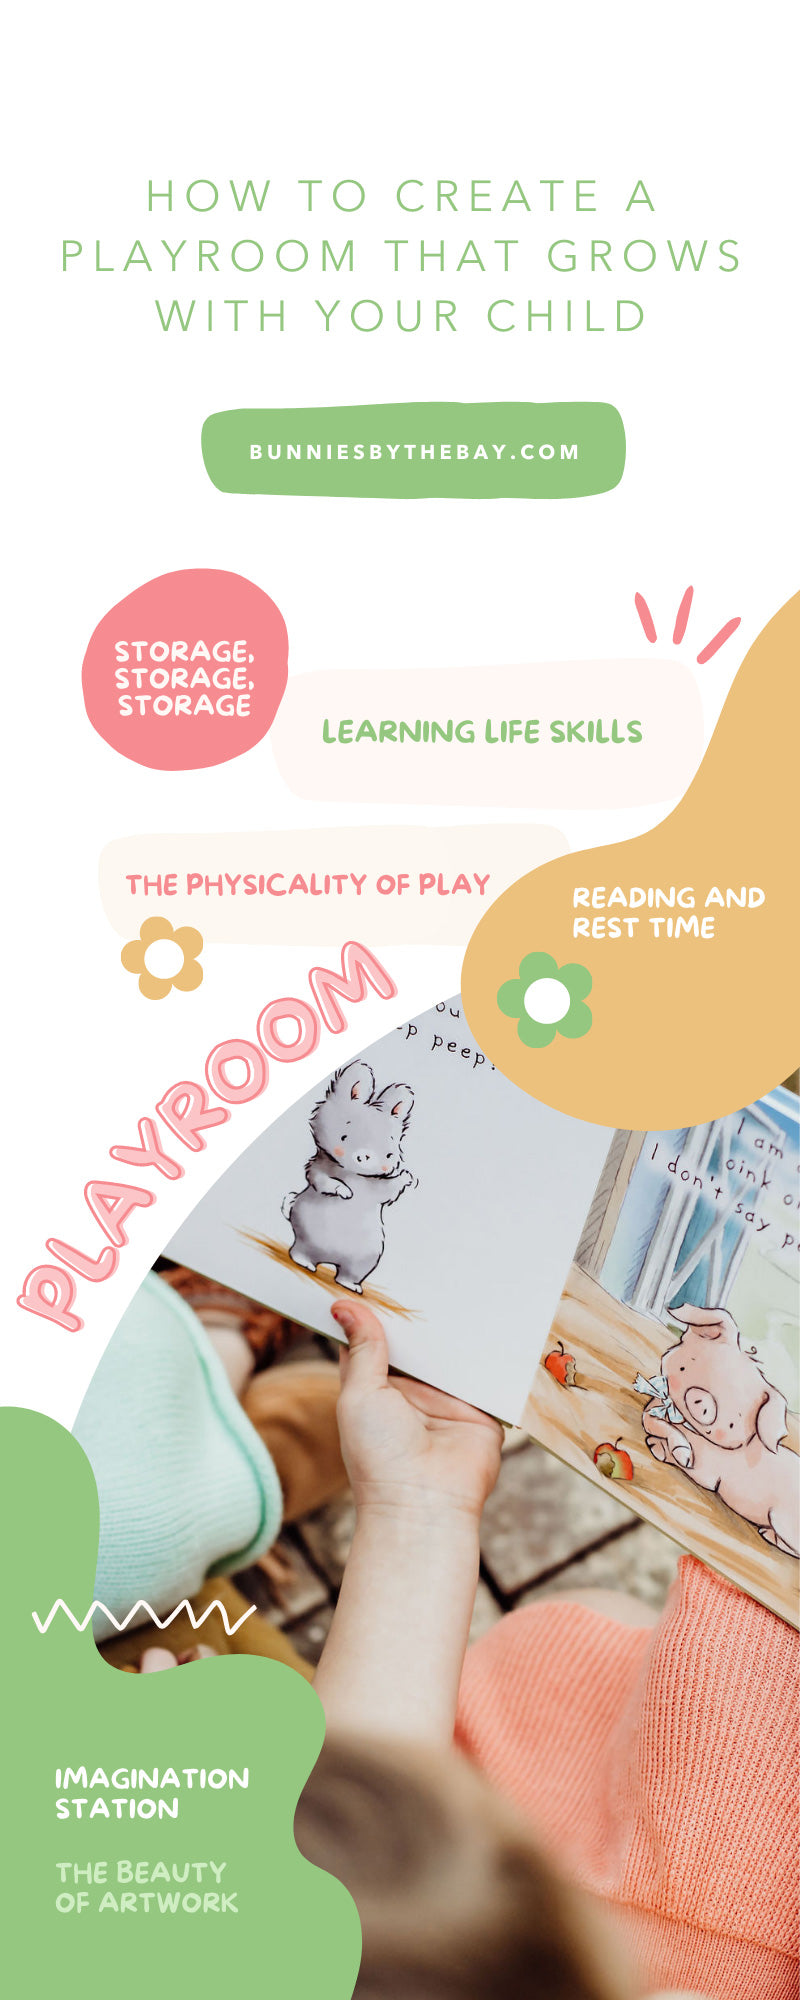 How To Create a Playroom That Grows With Your Child